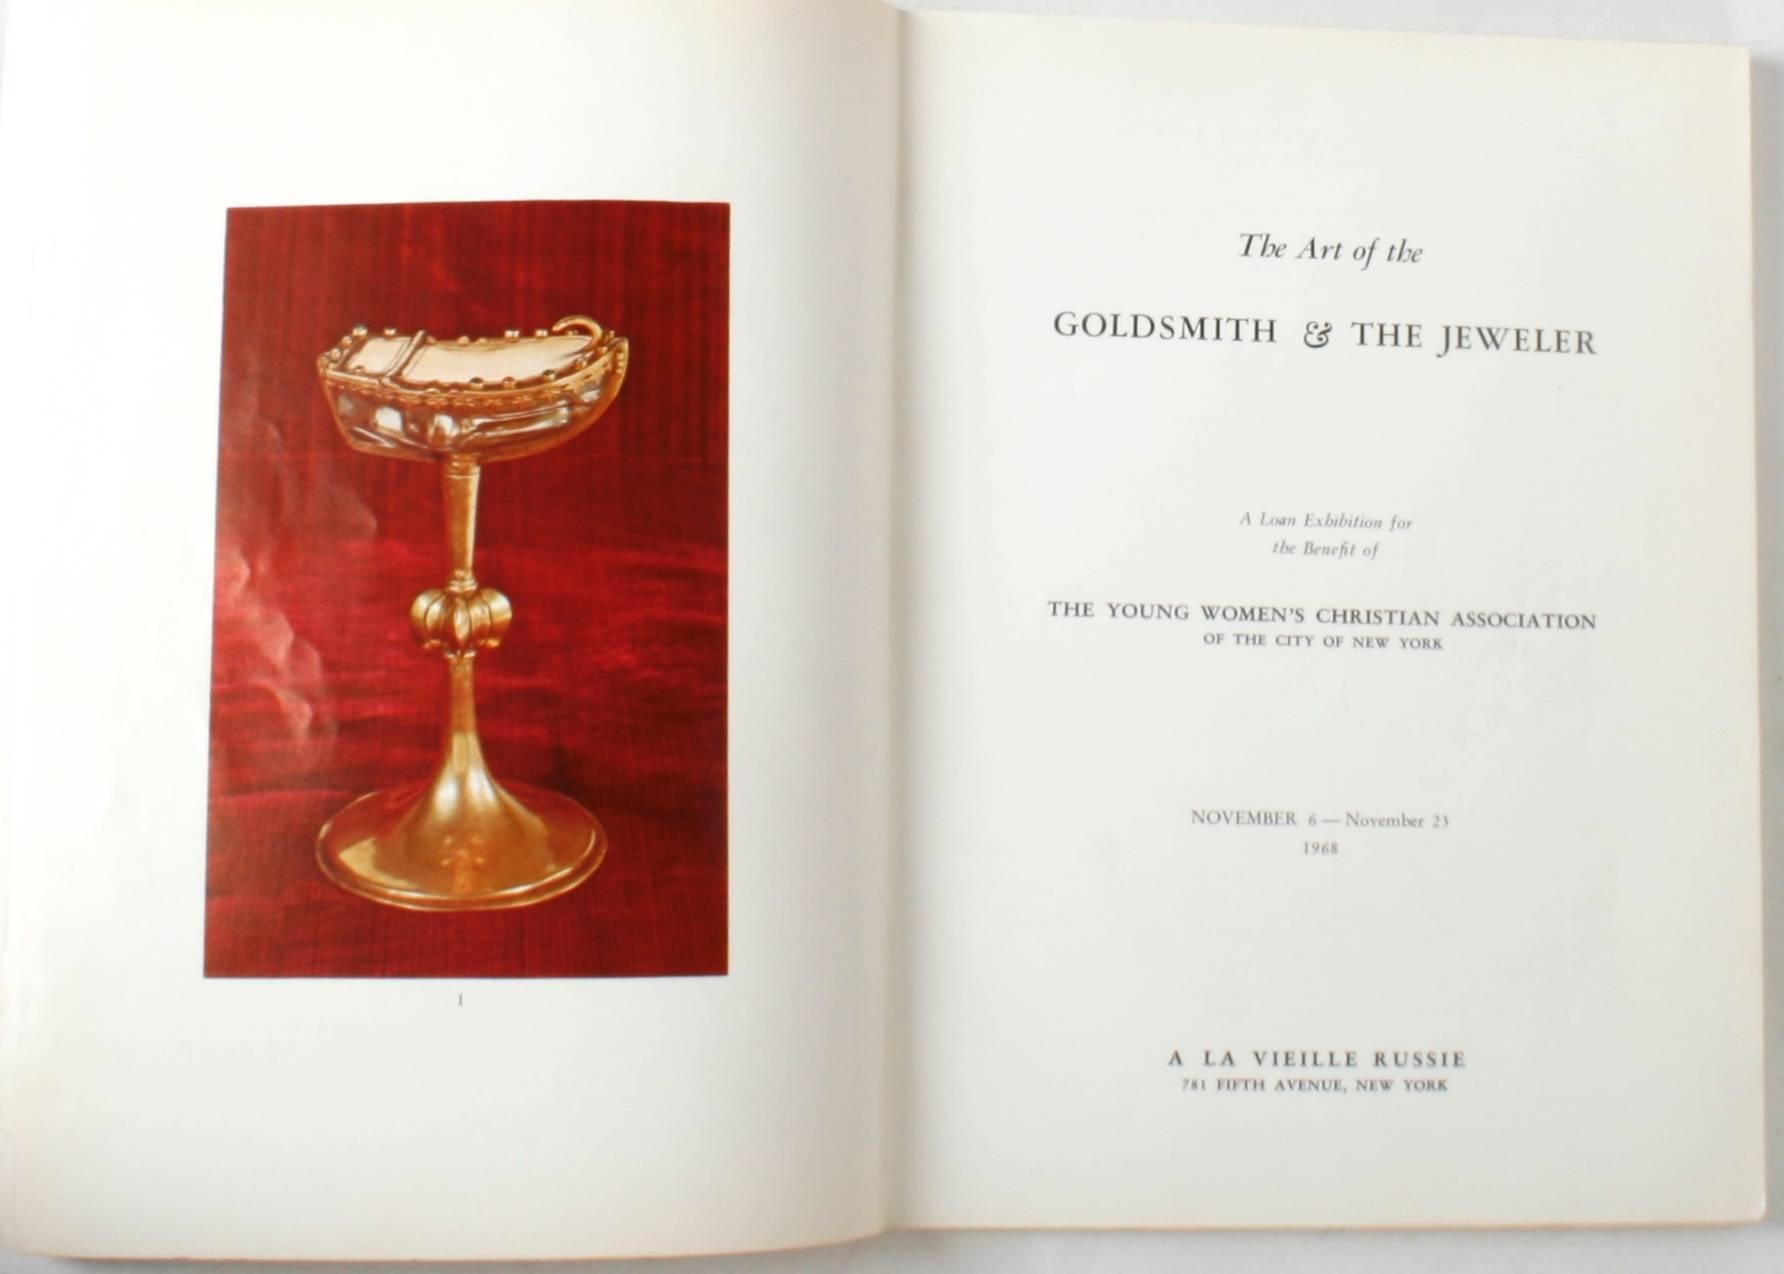 The Art of The Goldsmith and The Jeweler. New York: A La Vieille Russie, 1968. First edition paperback. 139 pp. A catalogue from a loan exhibition to benefit The Young Women's Christian Association for the City of New York held November 6 November